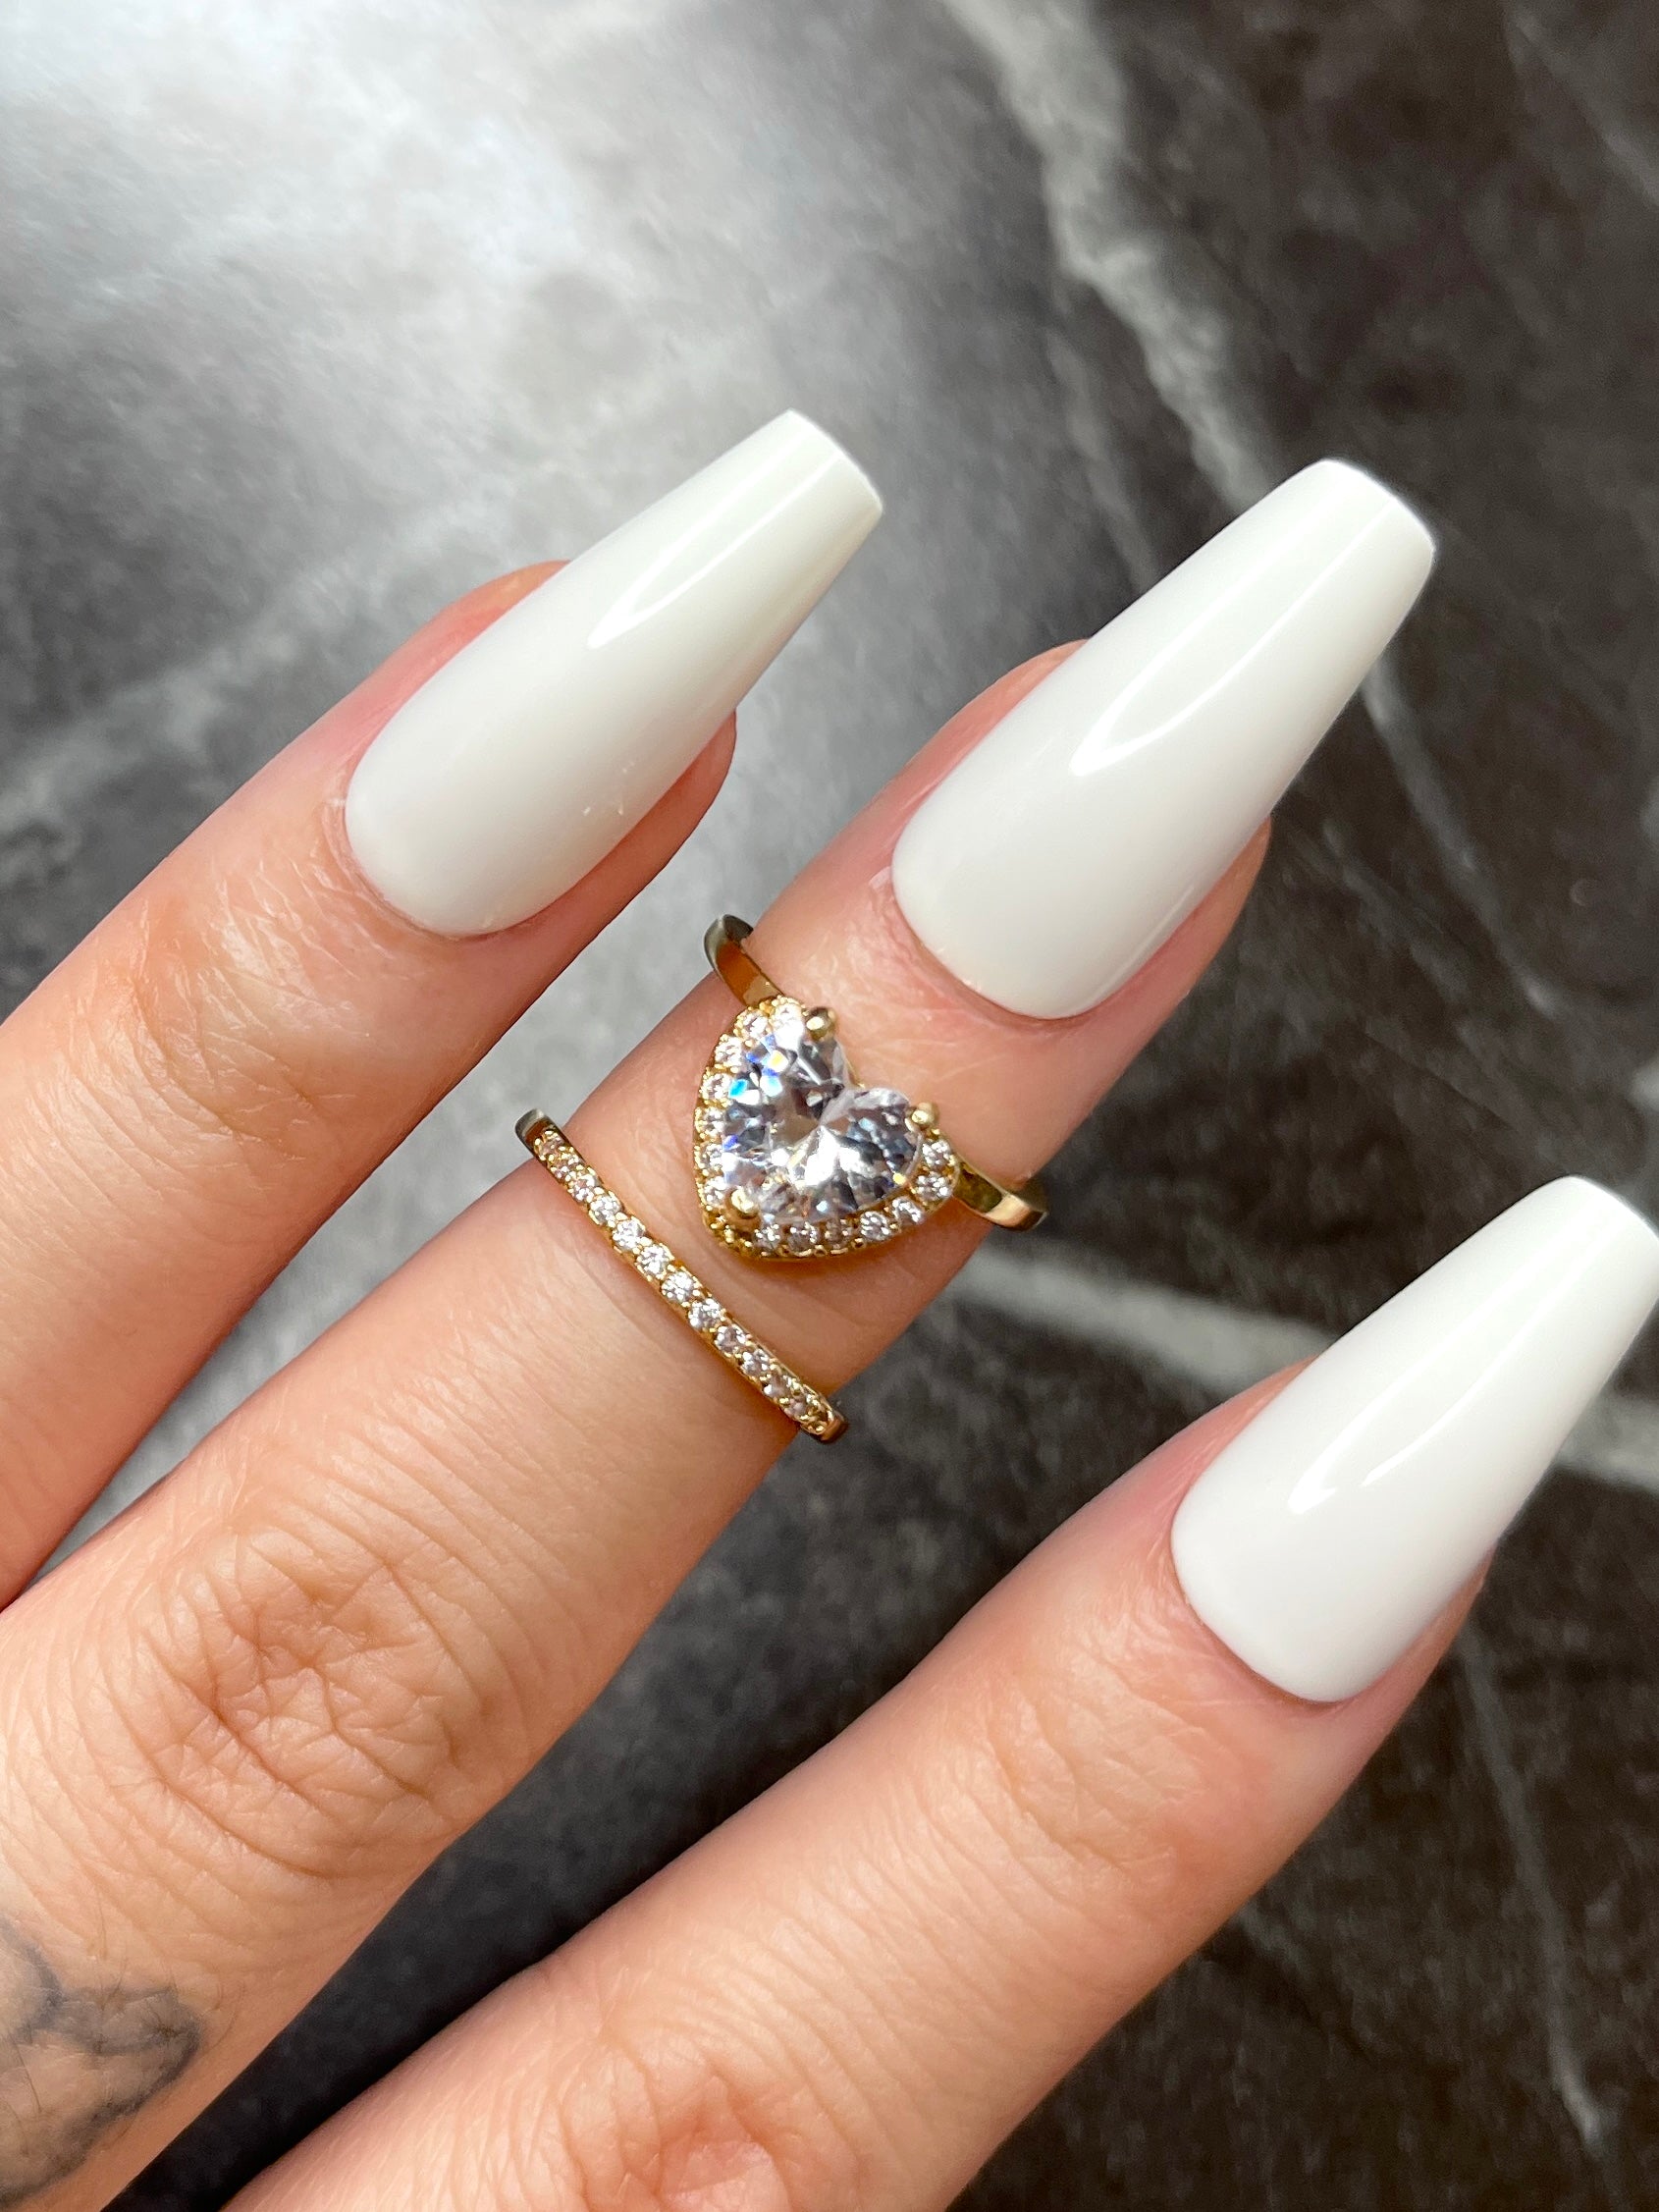 Shes always flashy ✨ in love with this bling set 😍 #flashy #fyp #vira... |  Birthday Nails | TikTok